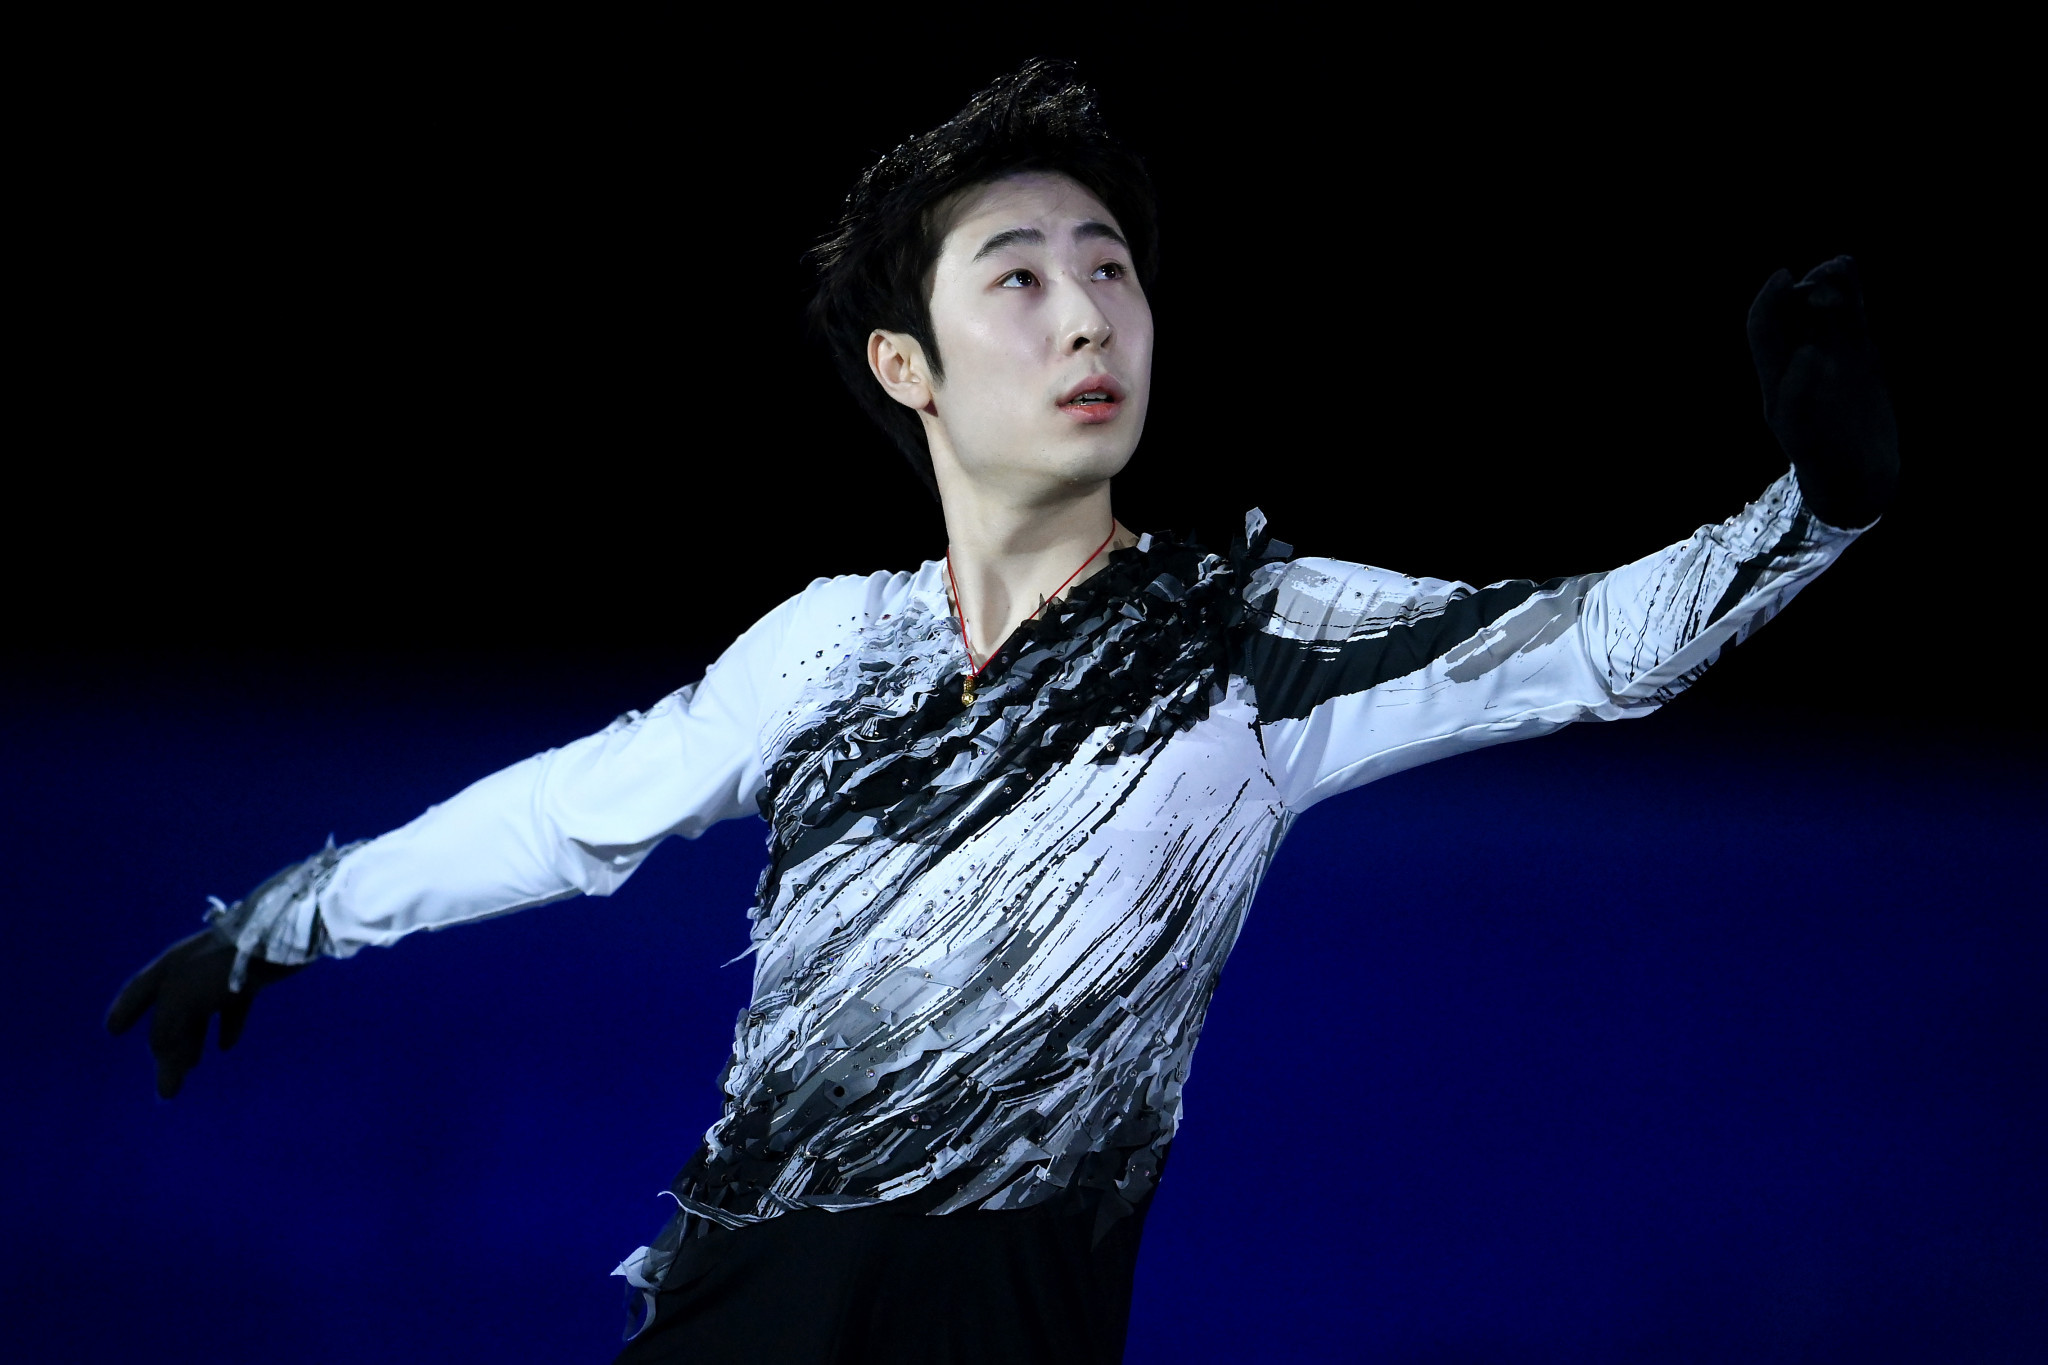 China's Boyang Jin is expected to return to the ice after missing much of the season through injury ©Getty Images